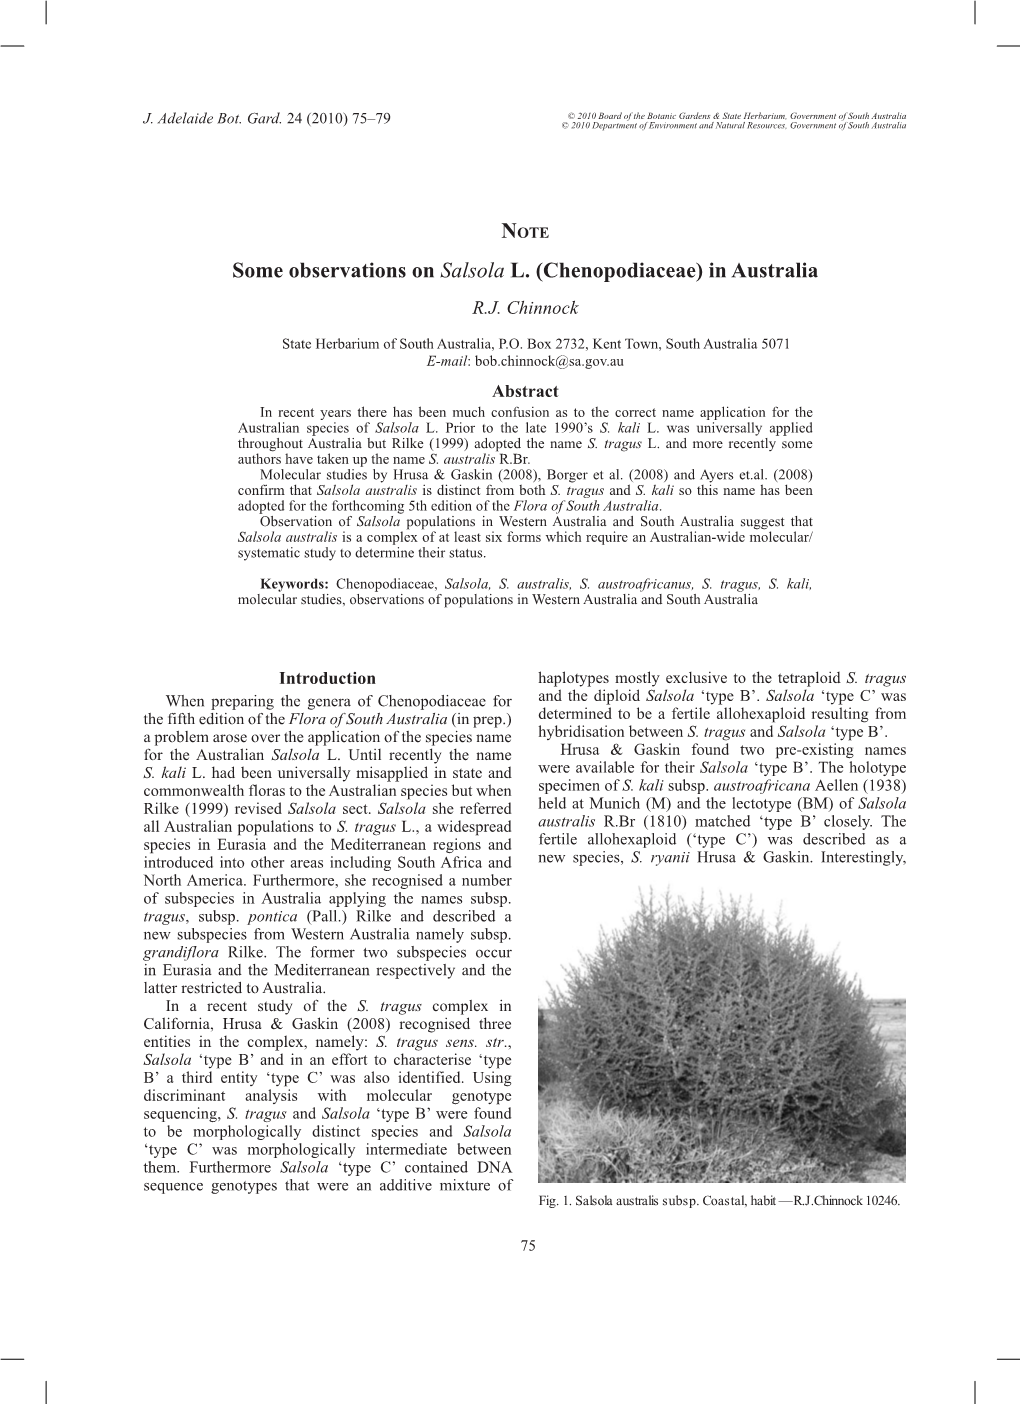 Some Observations on Salsola L. (Chenopodiaceae) in Australia R.J